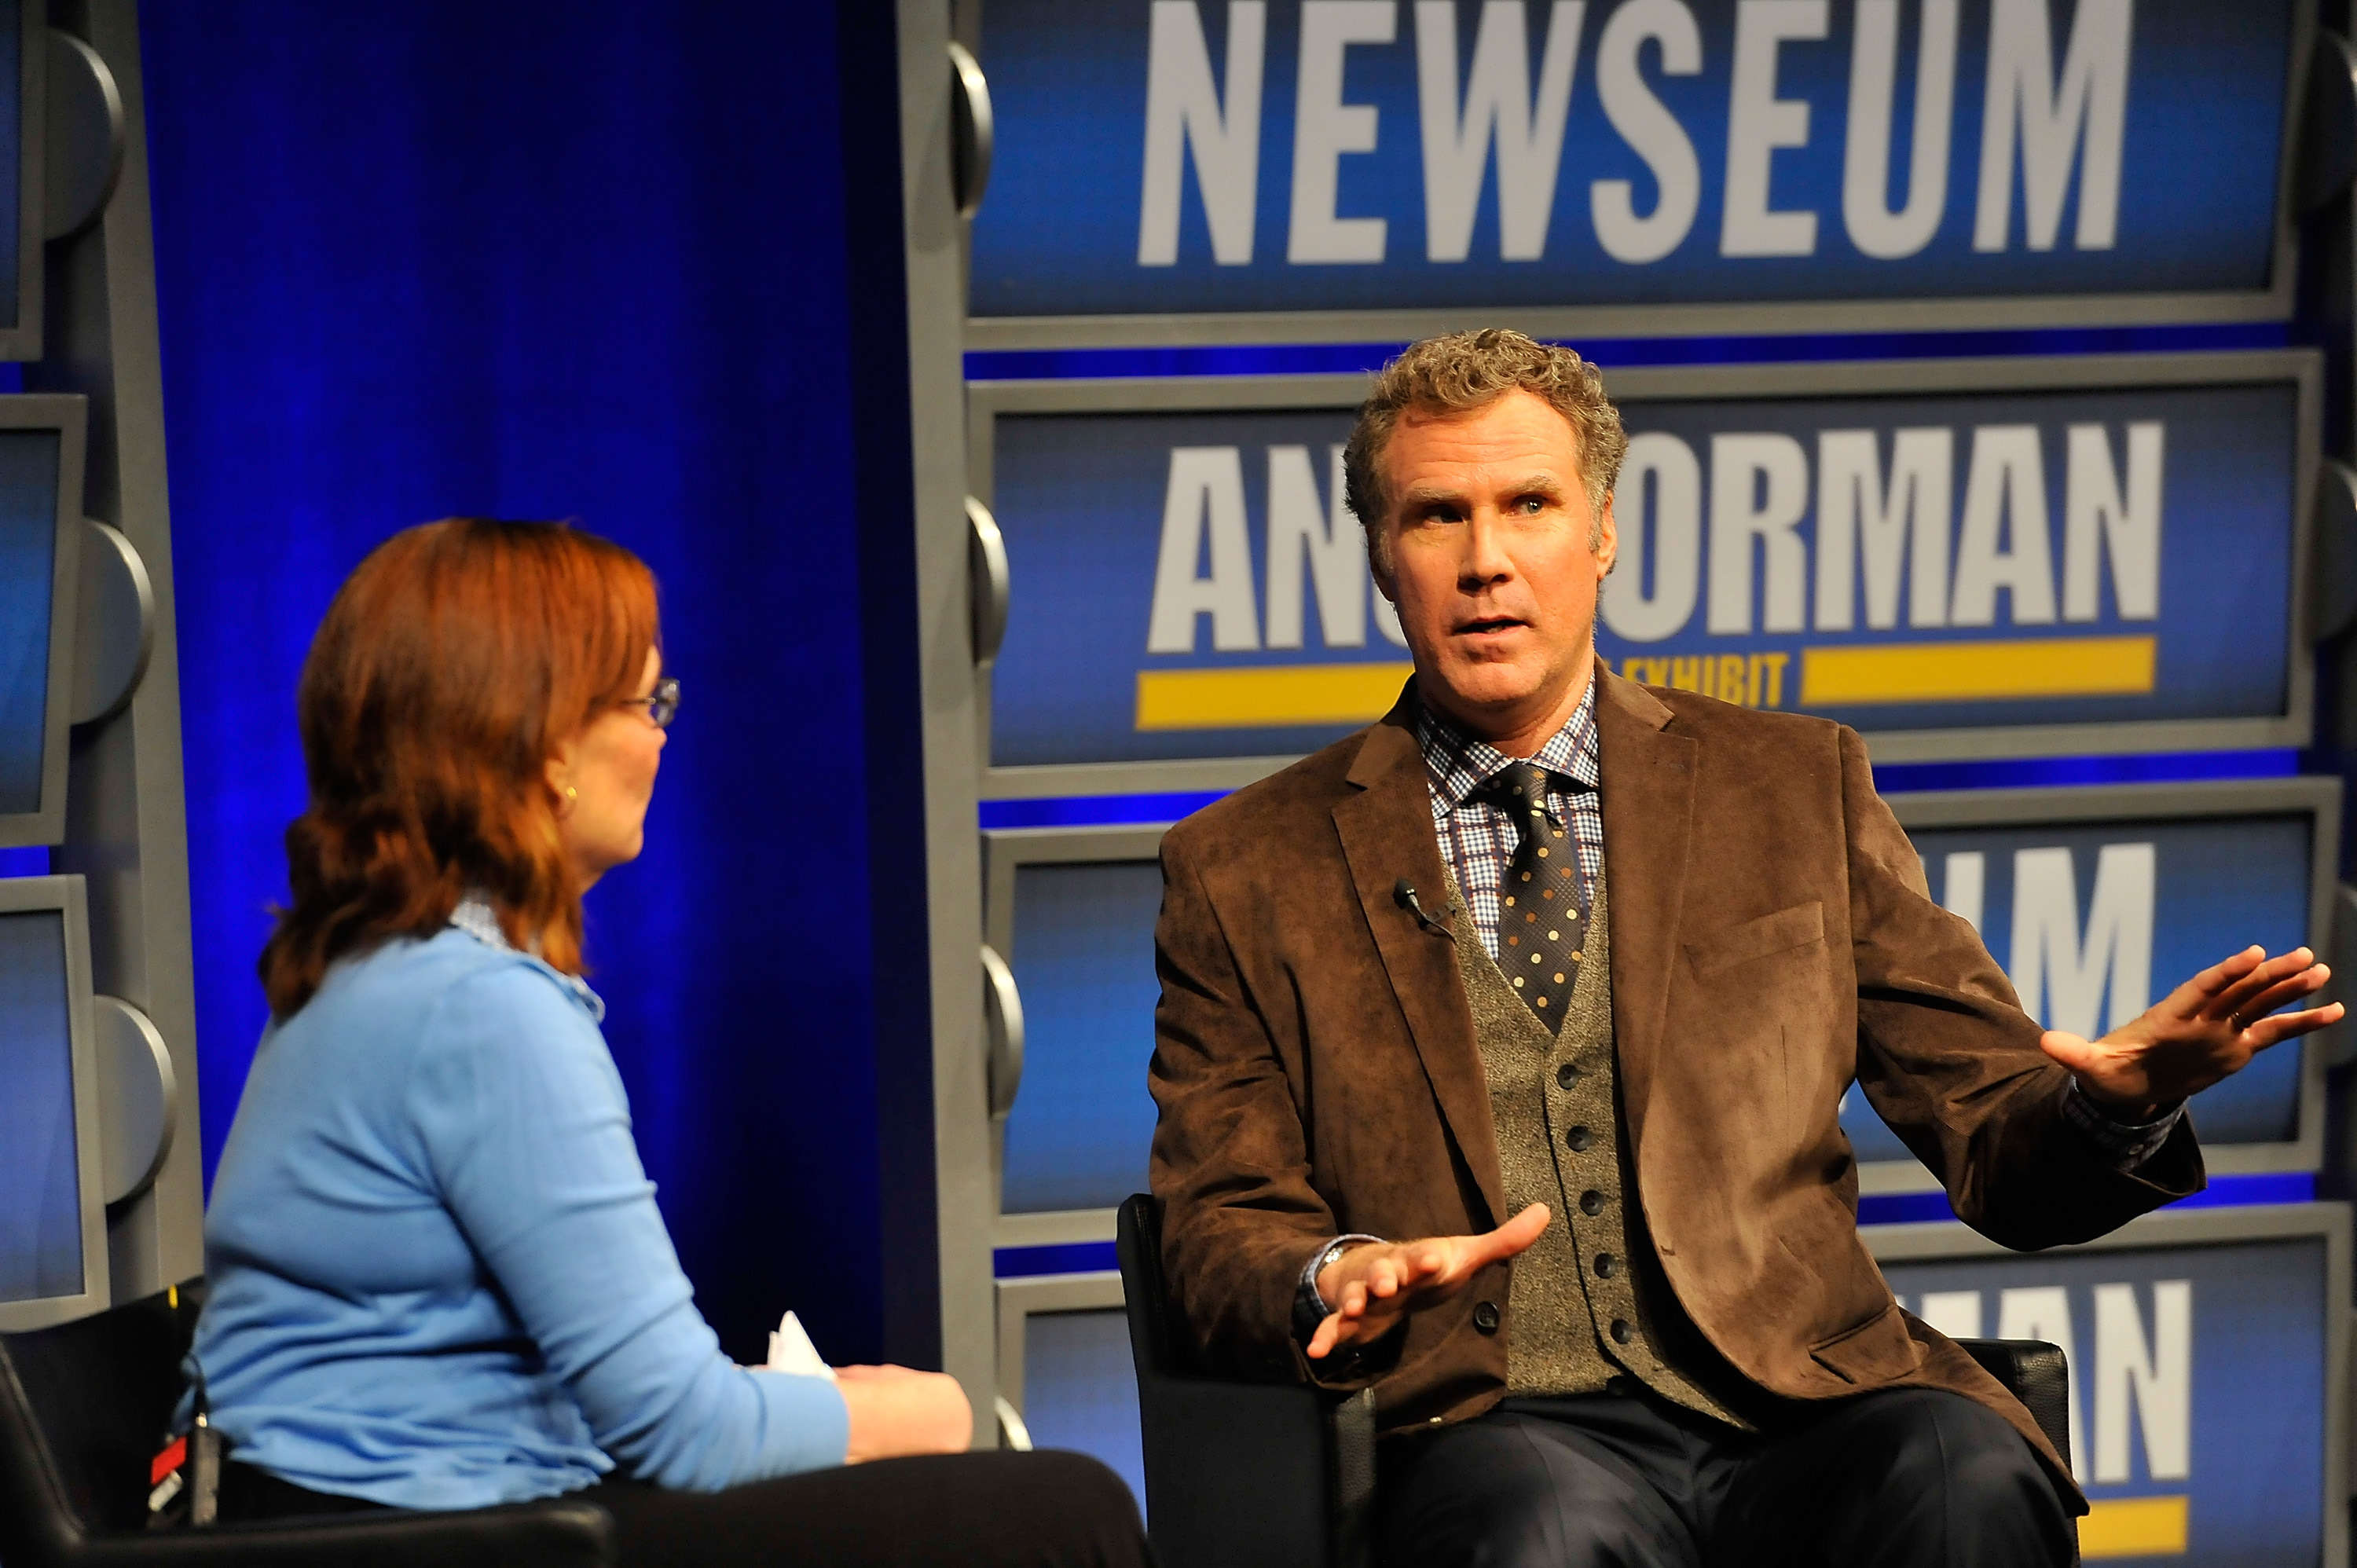 Will Ferrell ‘keeps it classy’ at D.C.’s Newseum event